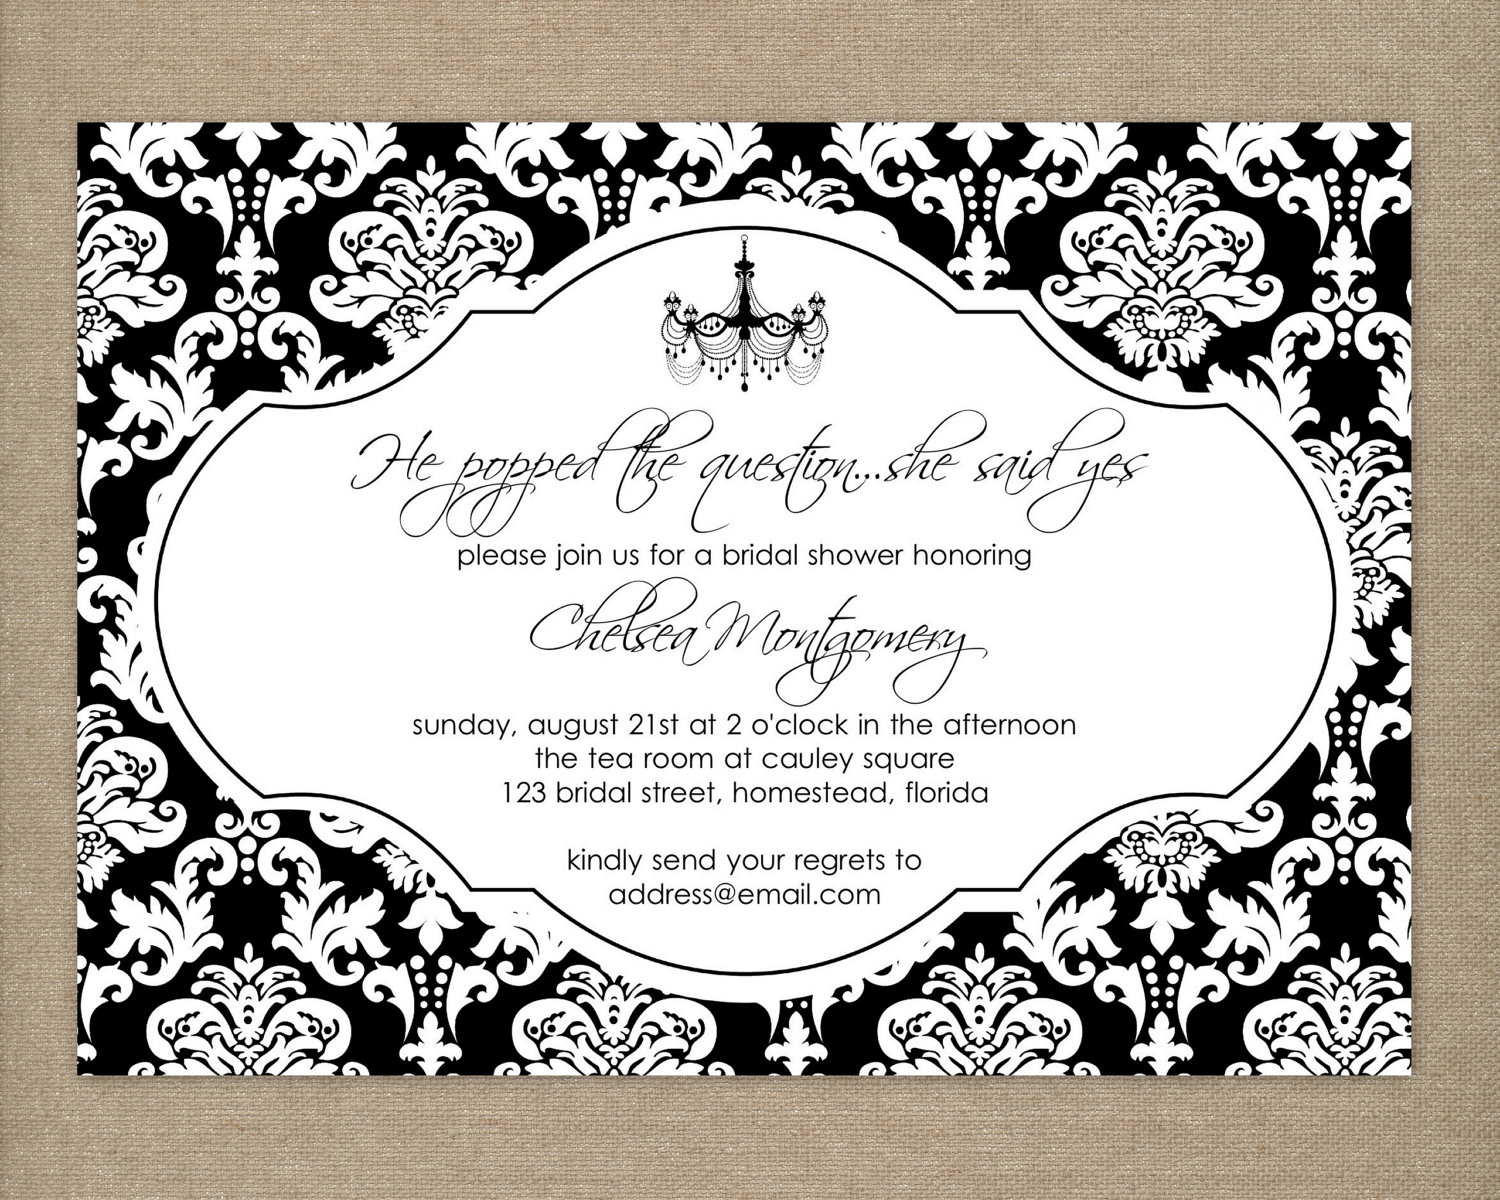 8 Best Images of Black And White Birthday Invitation Templates Printable - Black and White